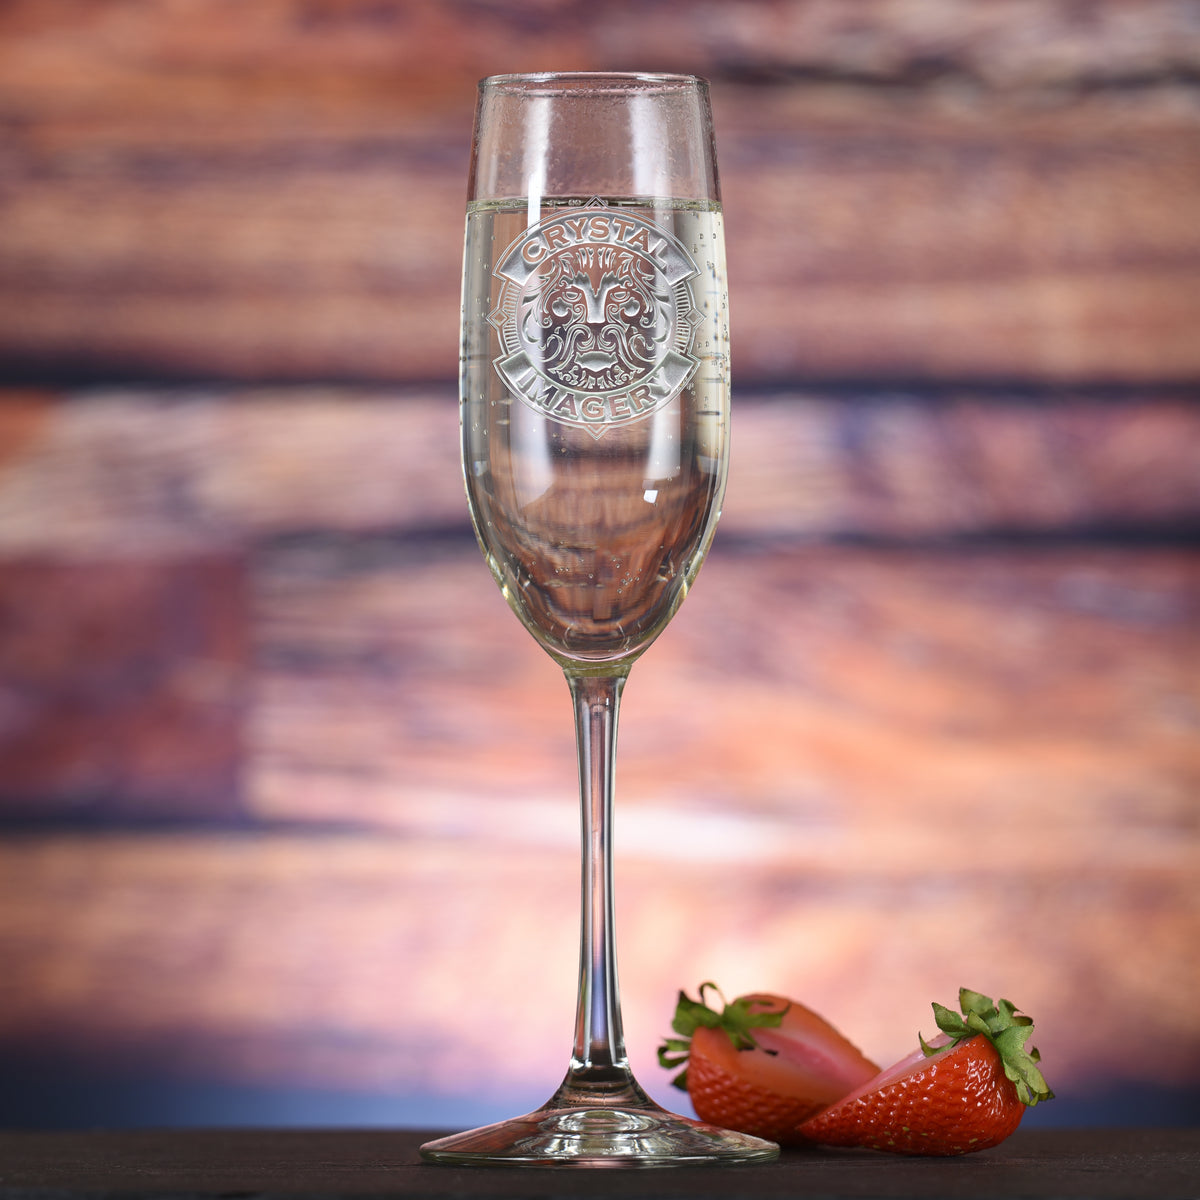 Buy or Send a pair of Engraved Champagne Flute Glasses Online!